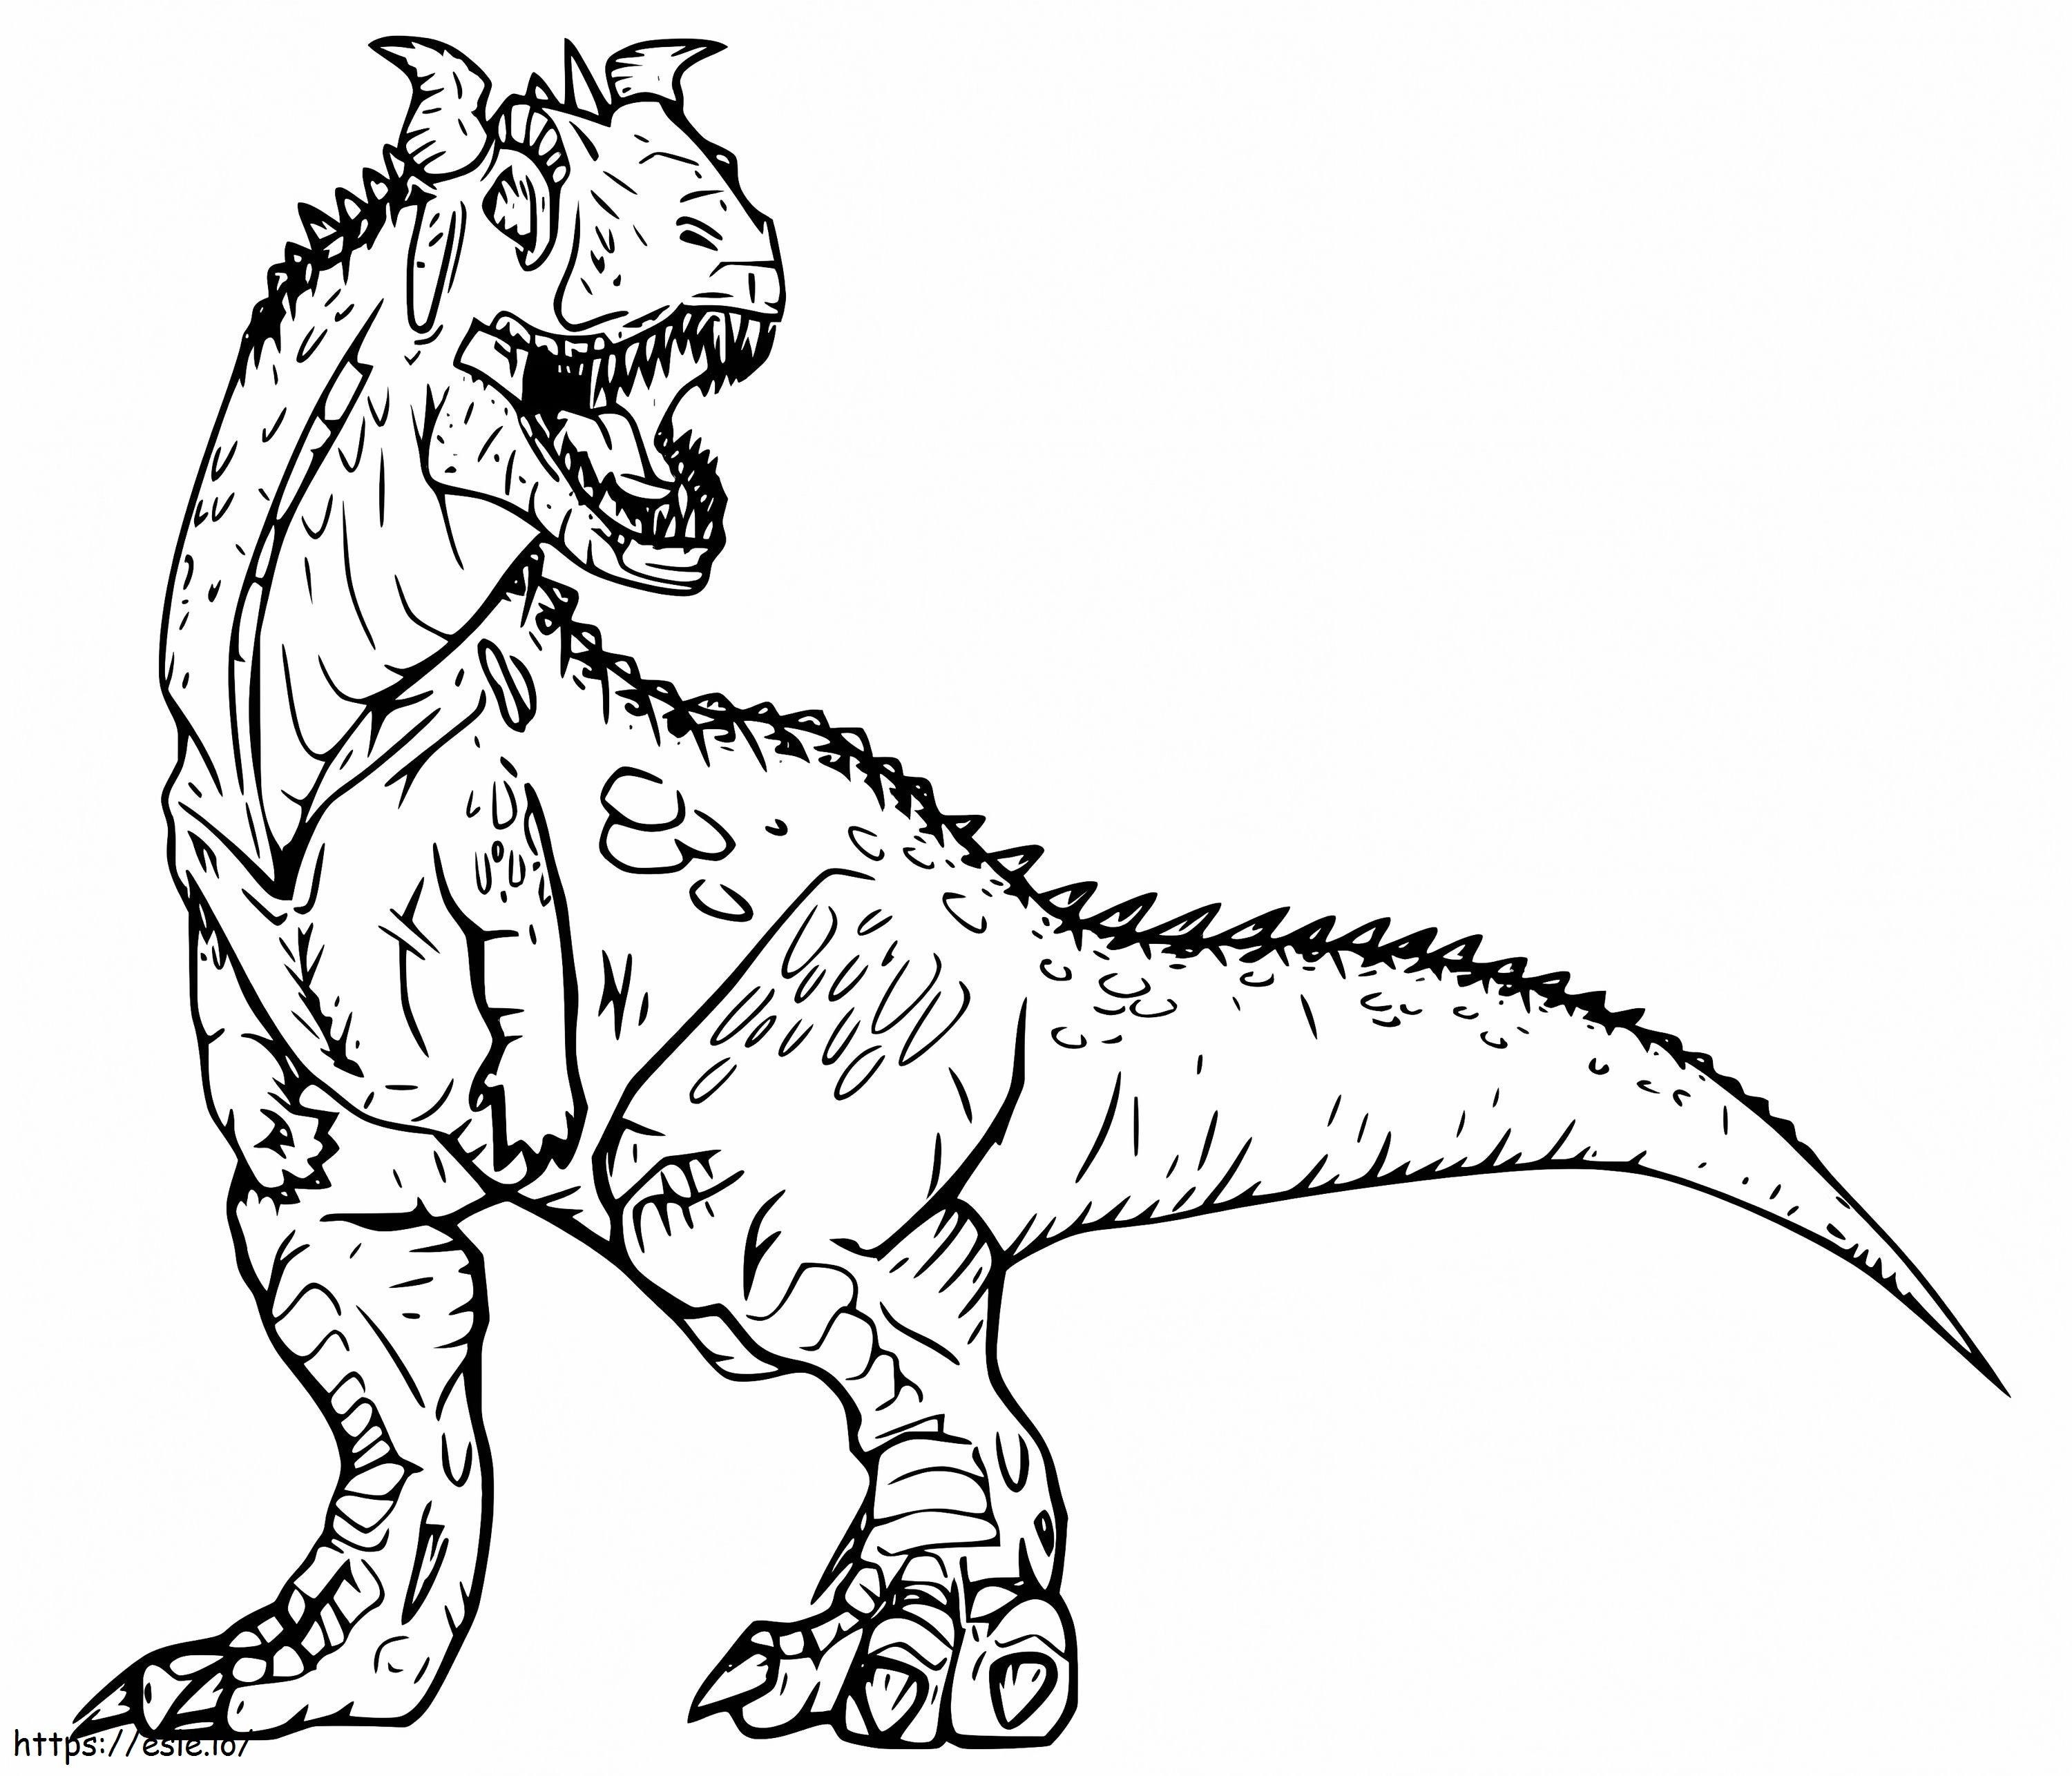 Scary Carnotaurus coloring page